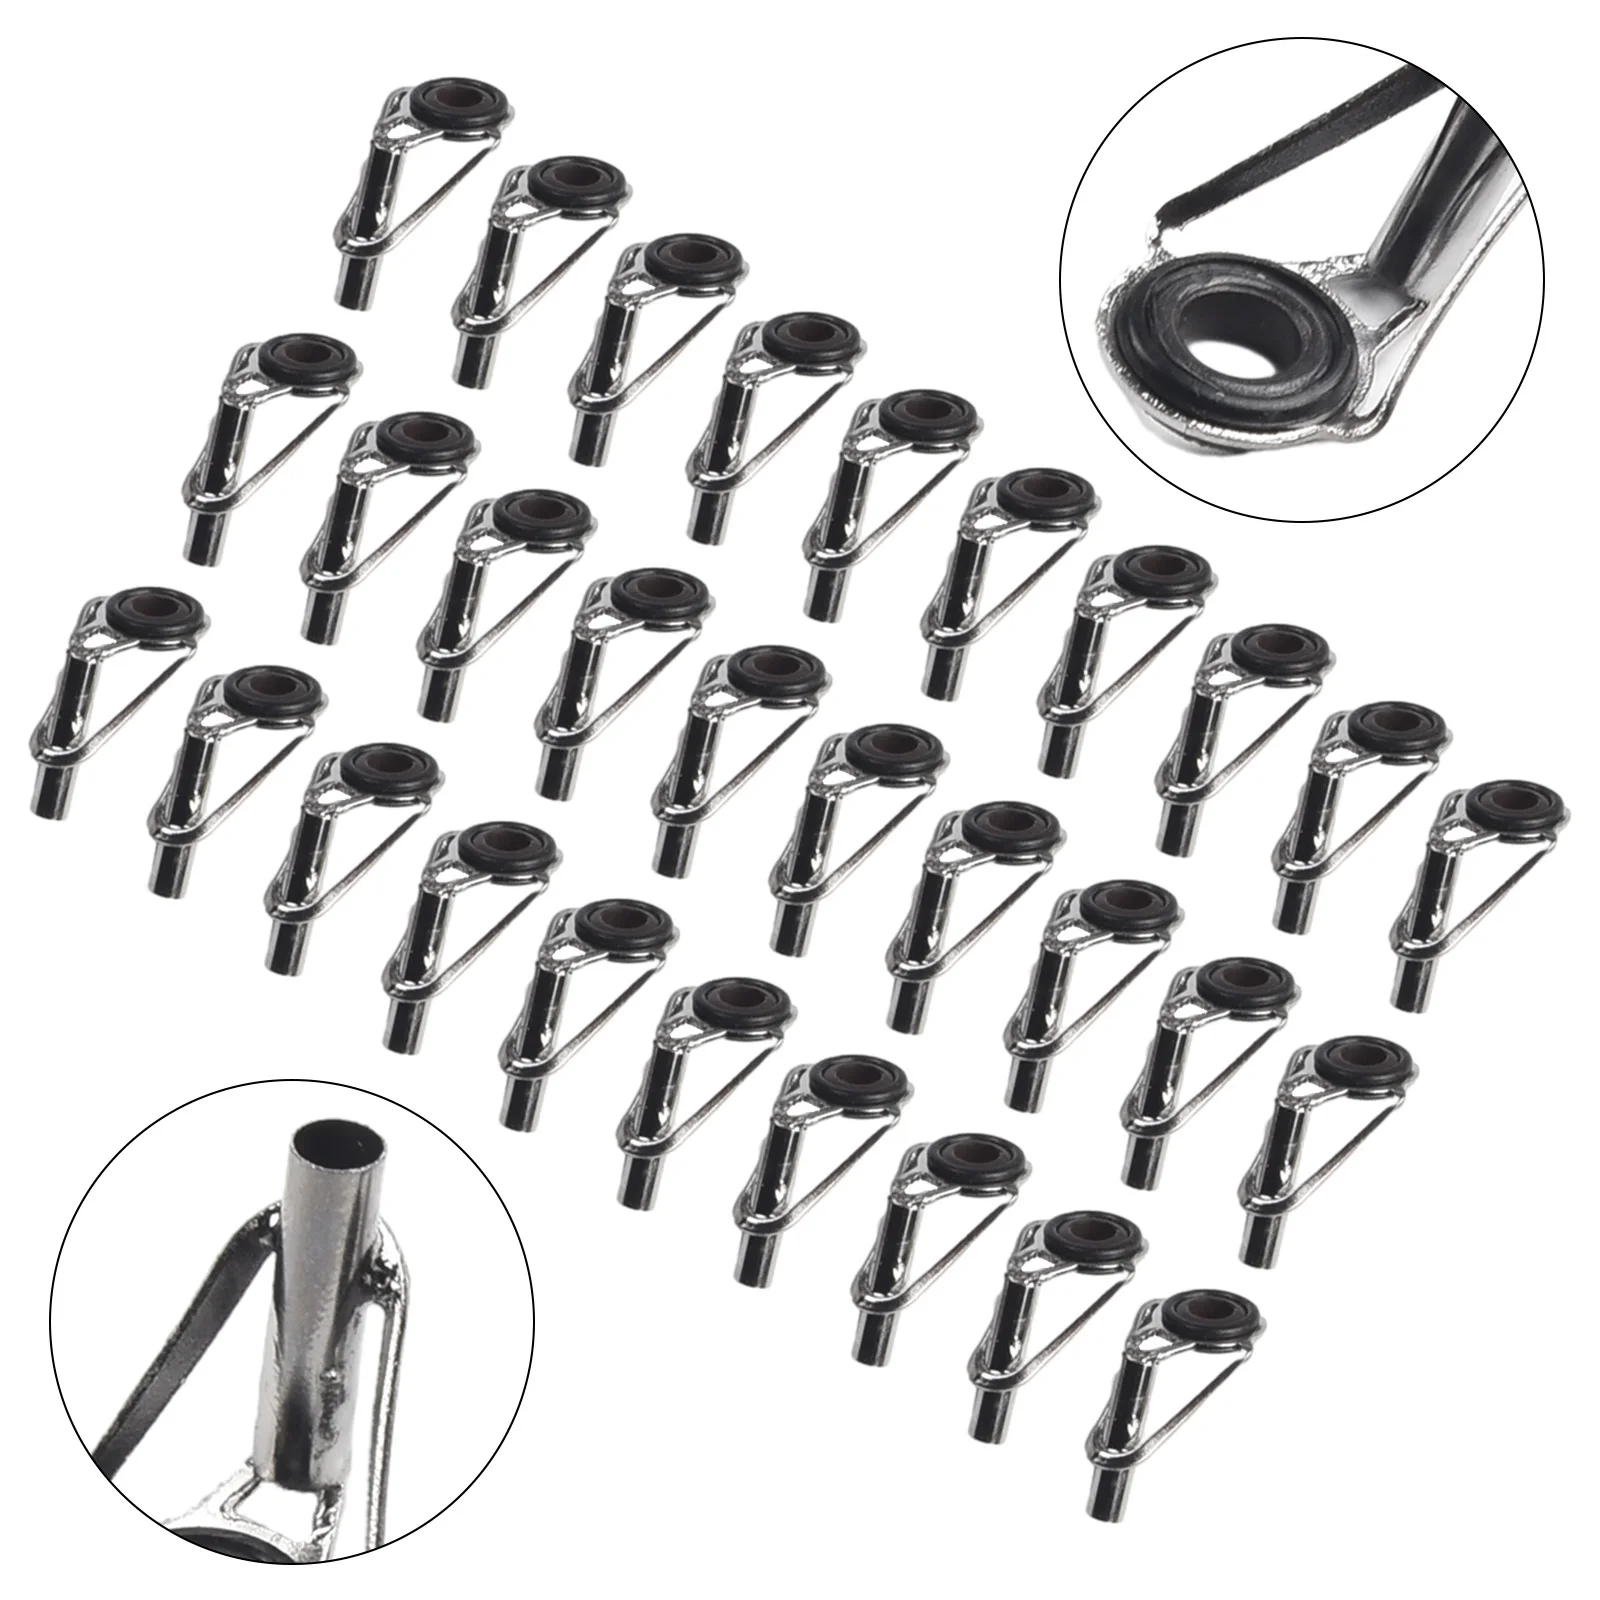 

Part Tool Fishing Rod Guide Rings Iron 30pcs Set 6 Kinds of Diameter Smooth Saltwater High Quality Accessories